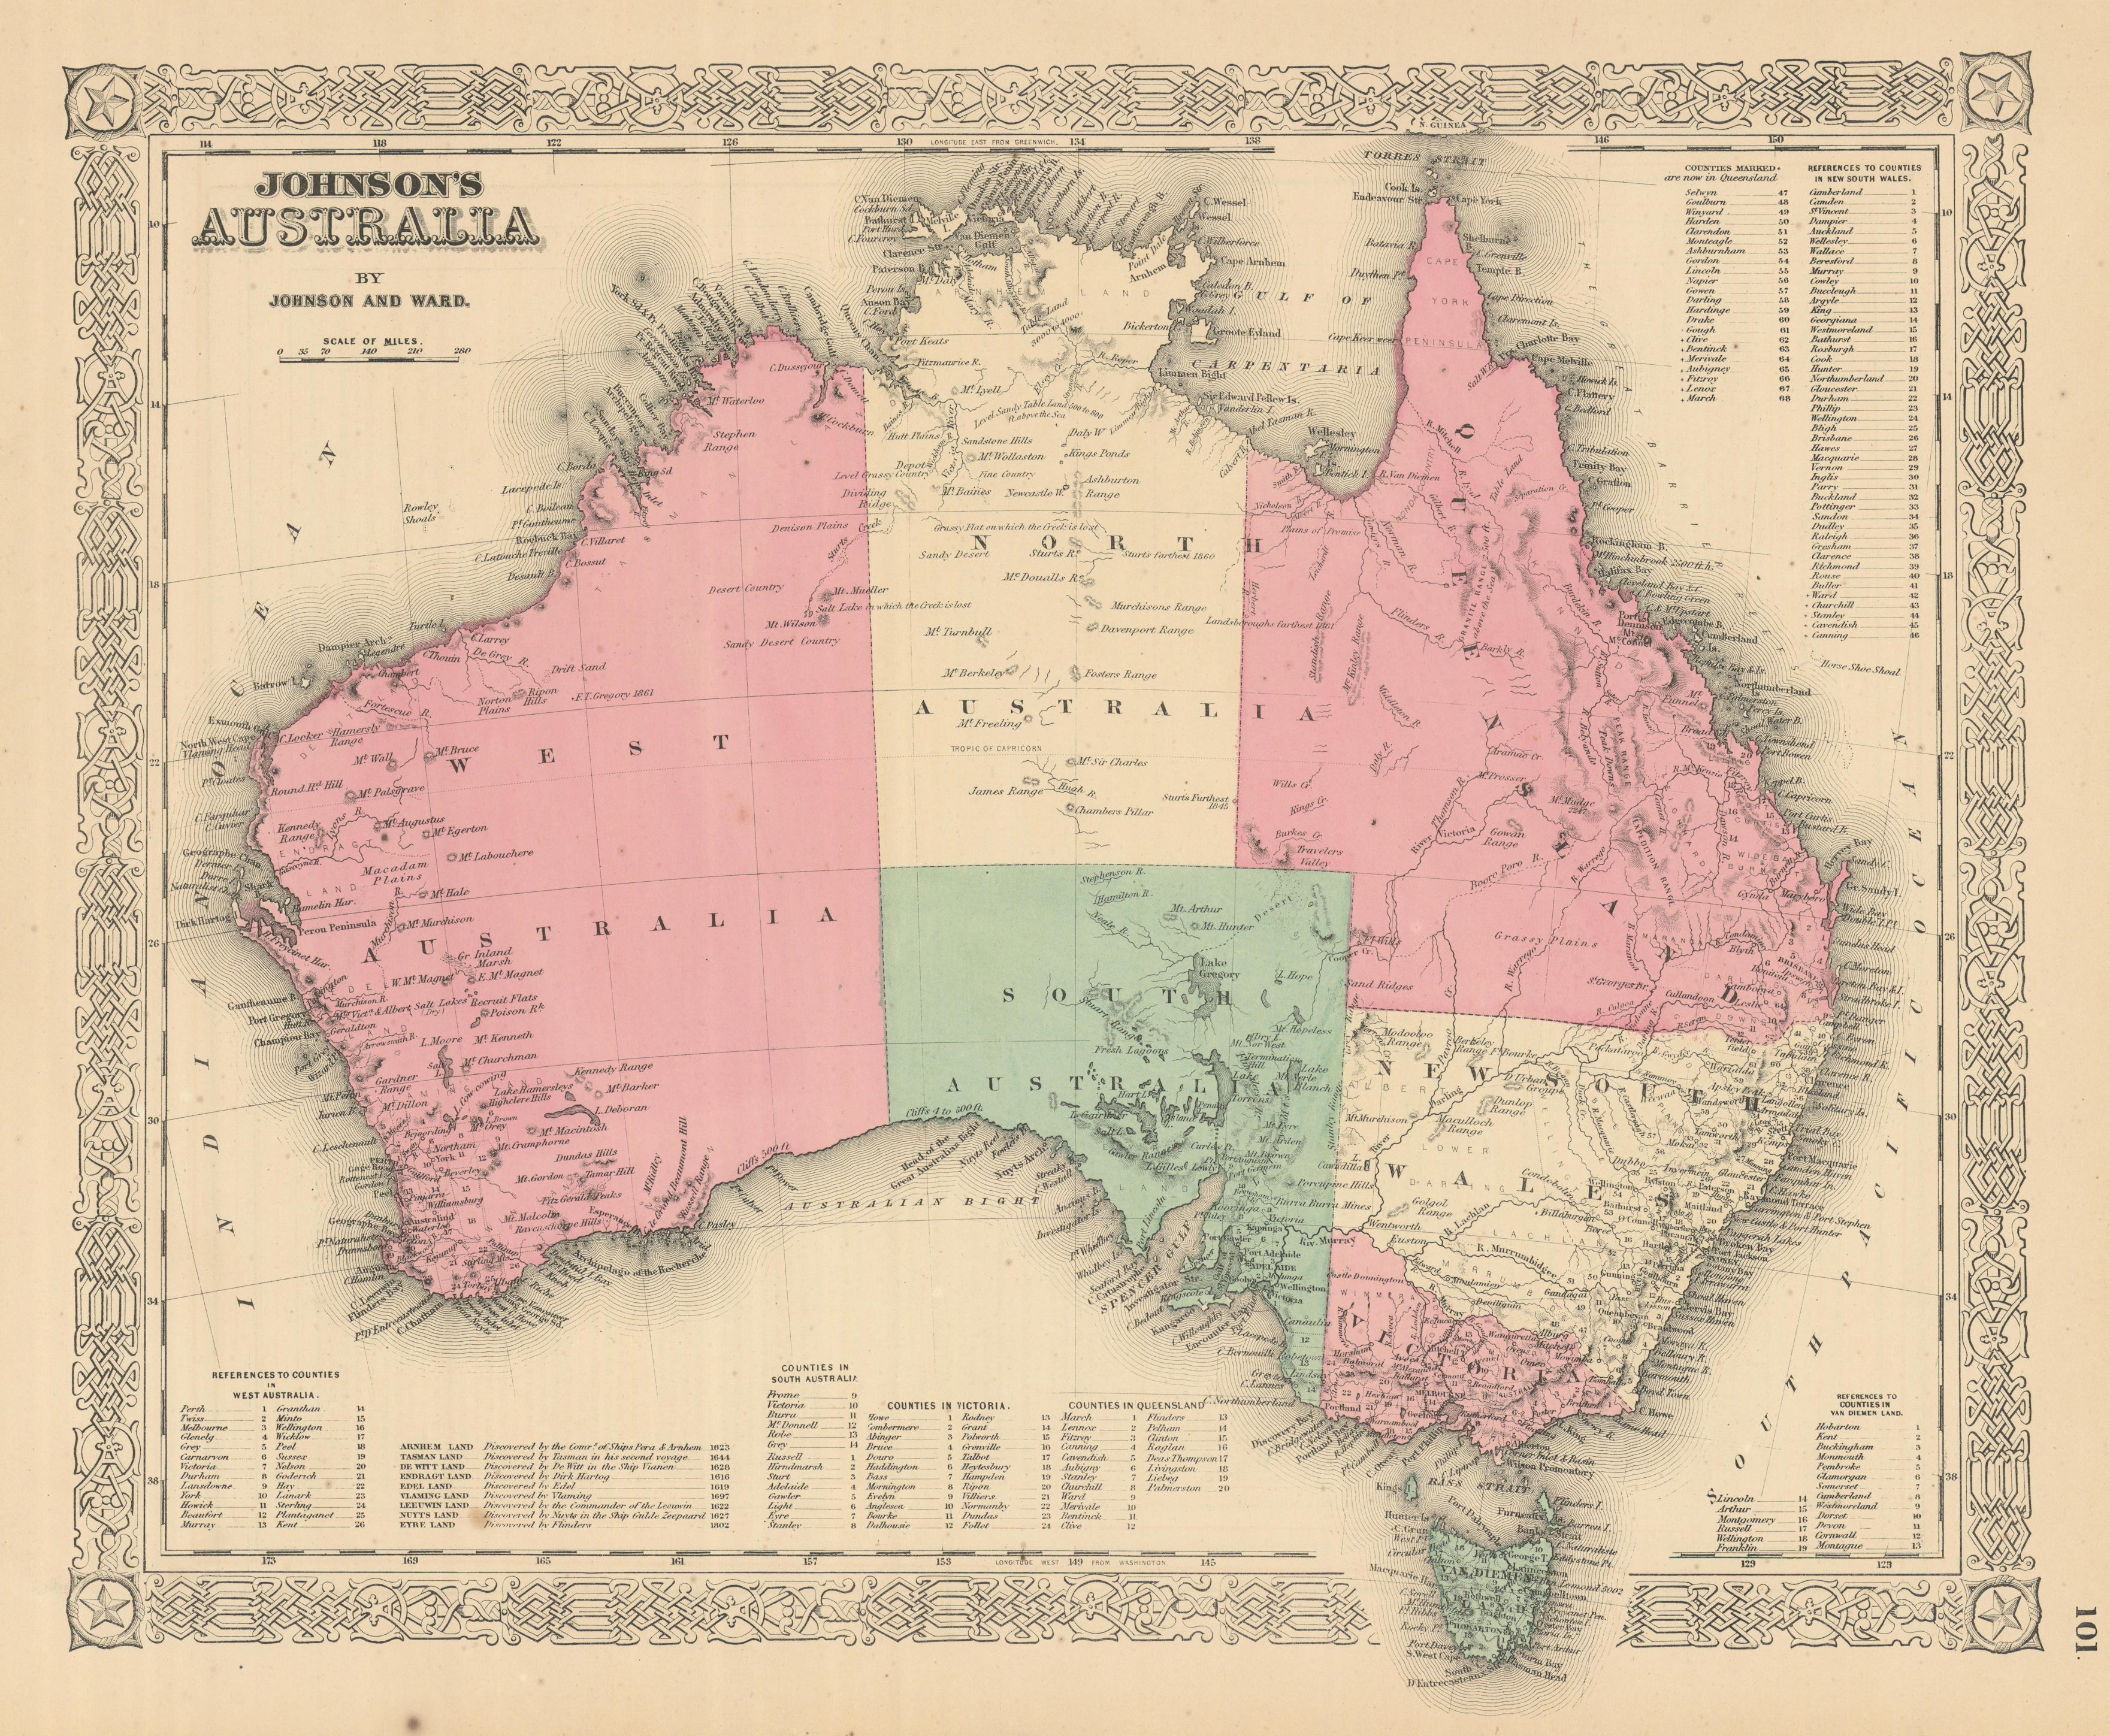 Associate Product Johnson's Australia showing states 1866 old antique vintage map plan chart